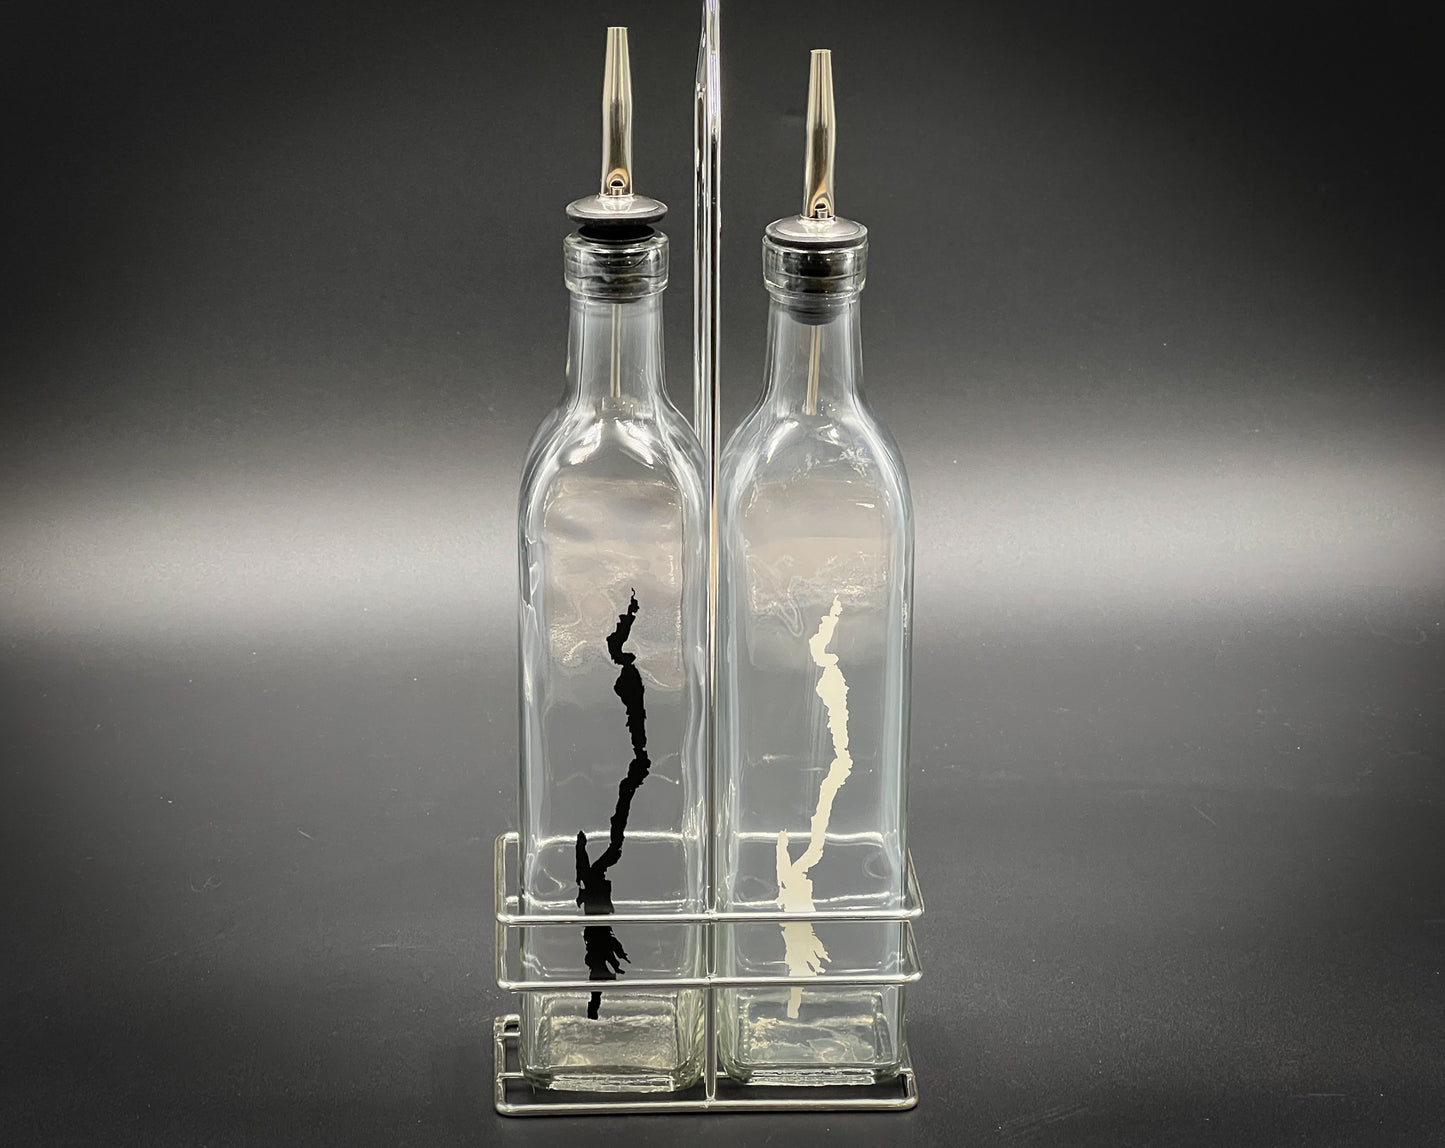 Oil and Vinegar set - Etched and Hand Painted